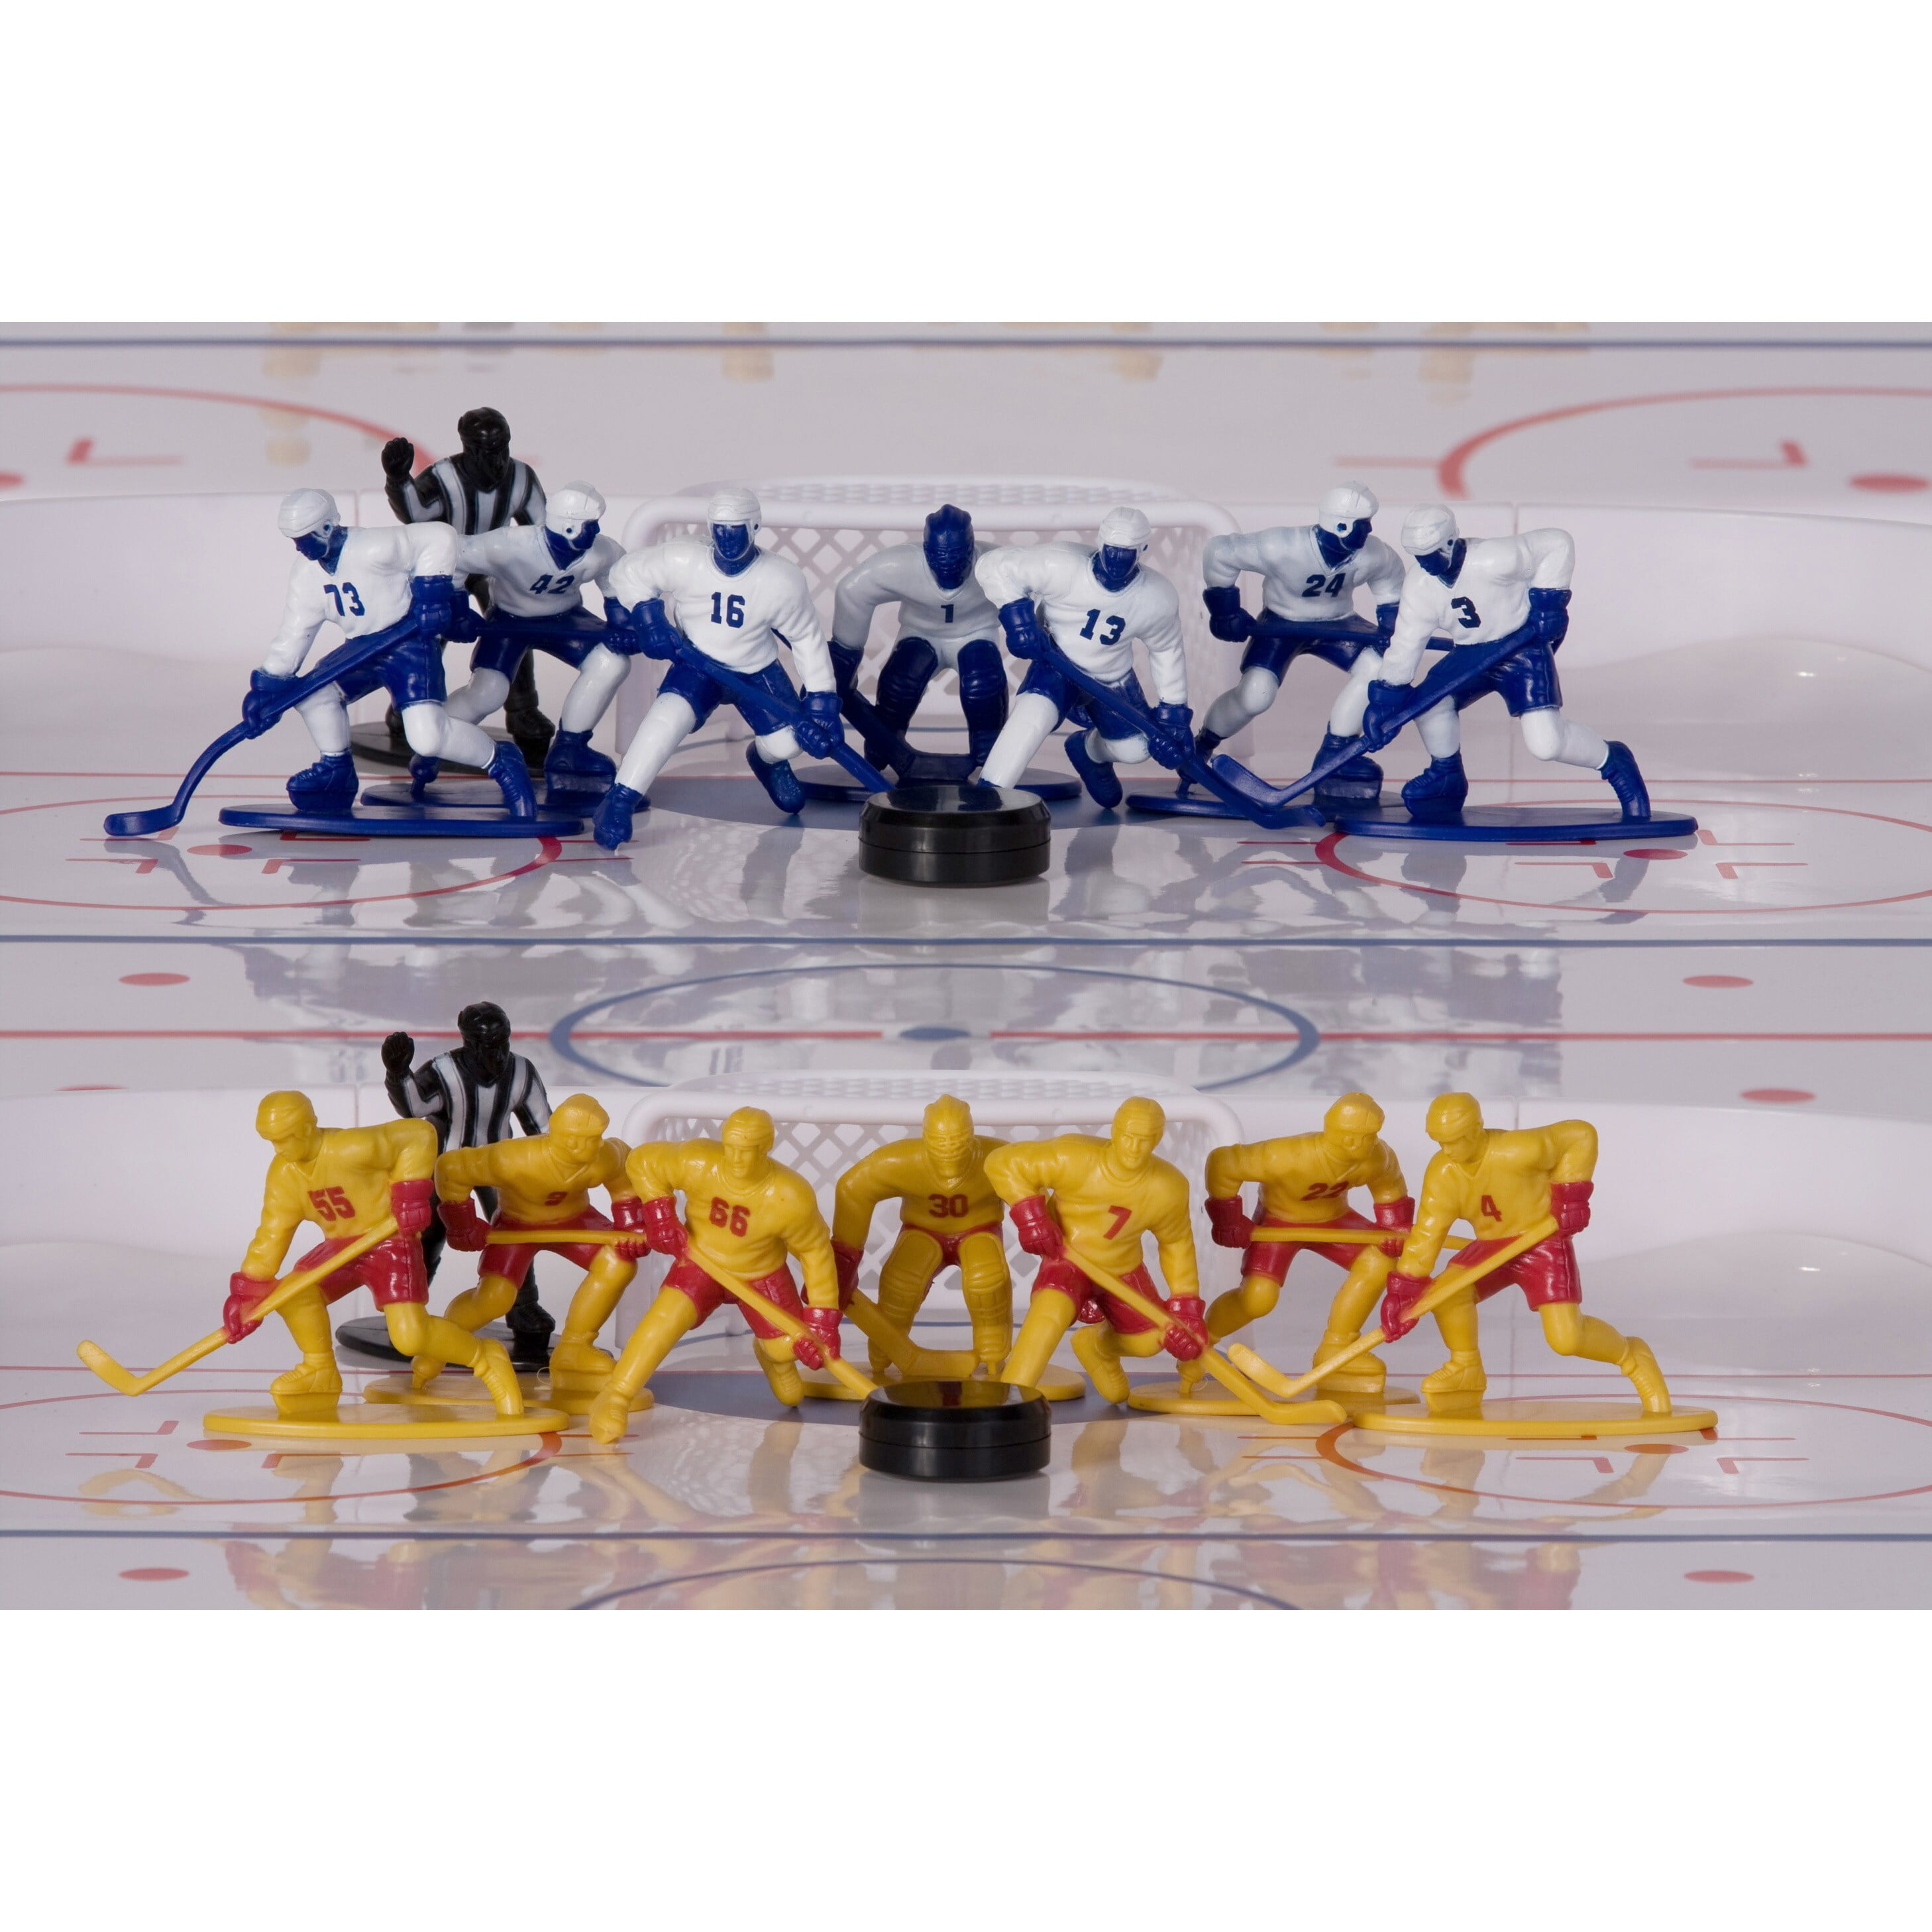 Sports Action Figures MasterPieces Hockey Guys